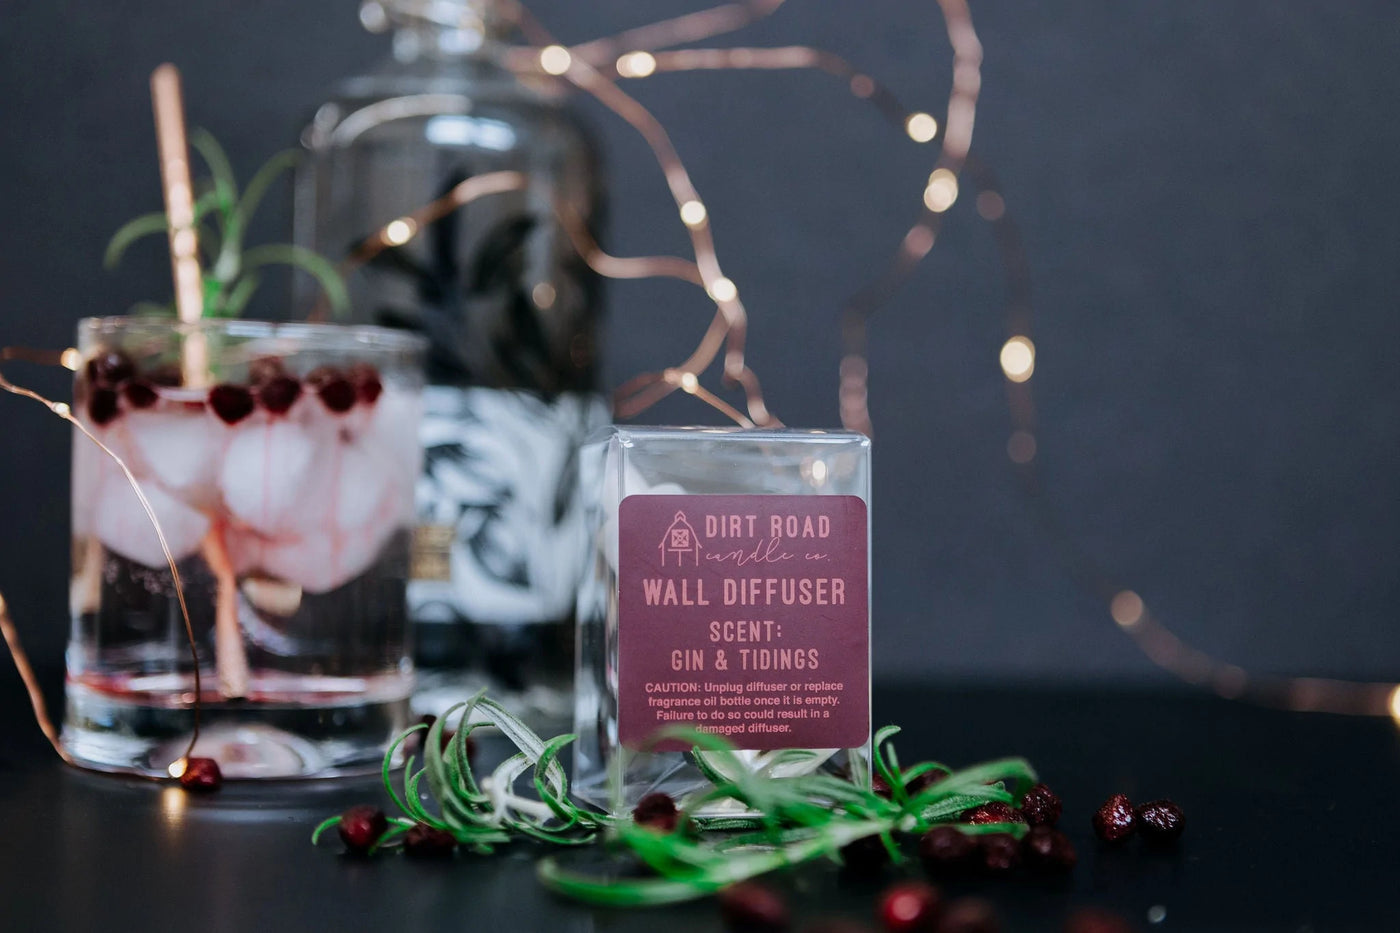 Dirt Road Candle Co GIN & TIDINGS Wall Diffuser